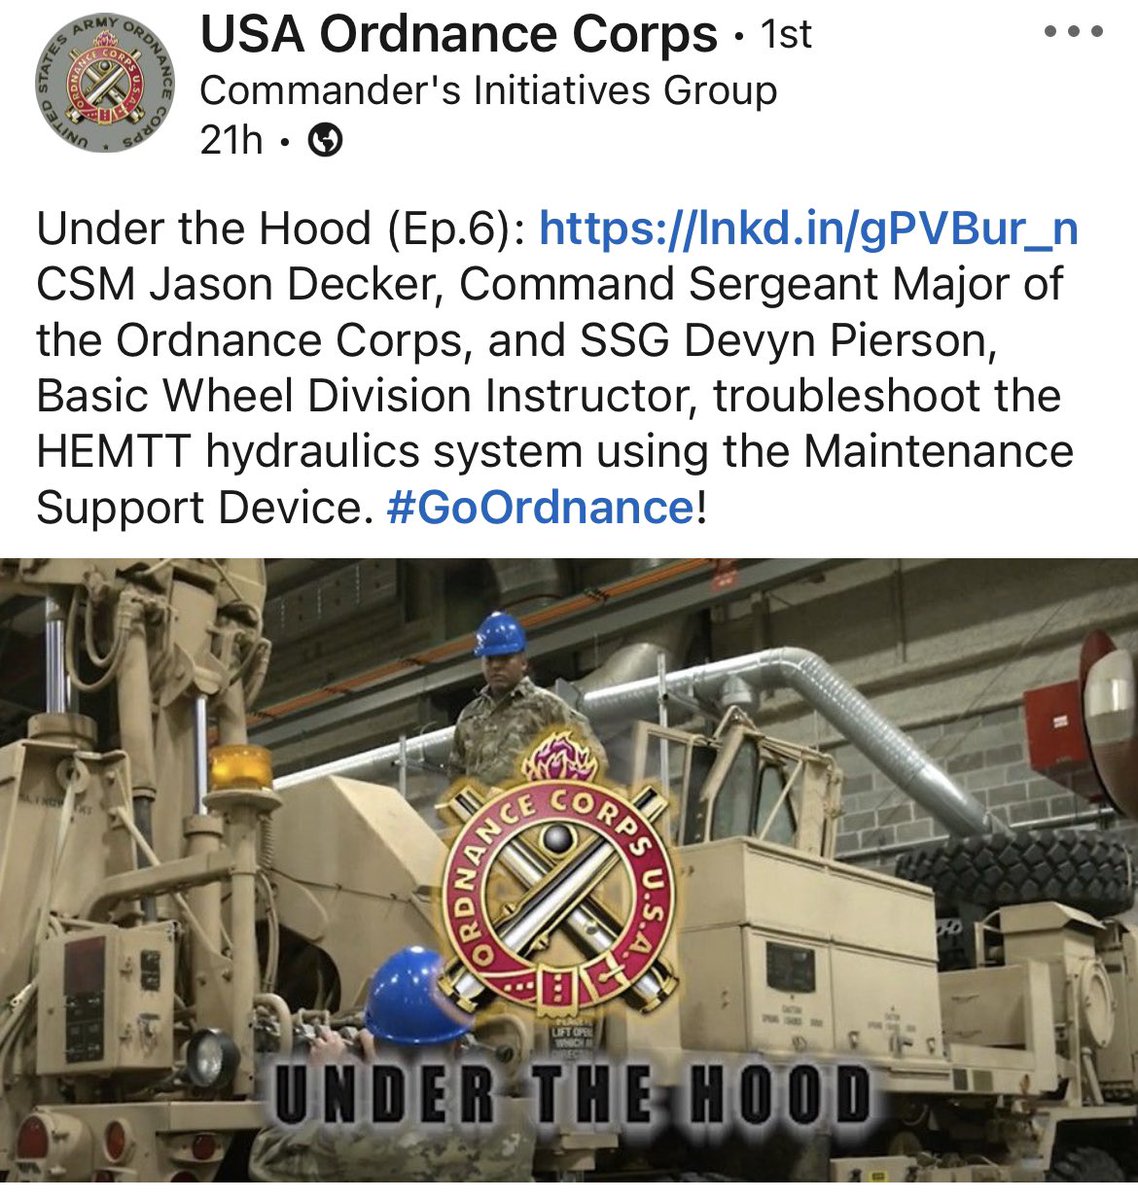 Check out the new #UnderTheHood with our very own SSG Peirson! m.youtube.com/watch?v=m7Jasc… @USAODCorps